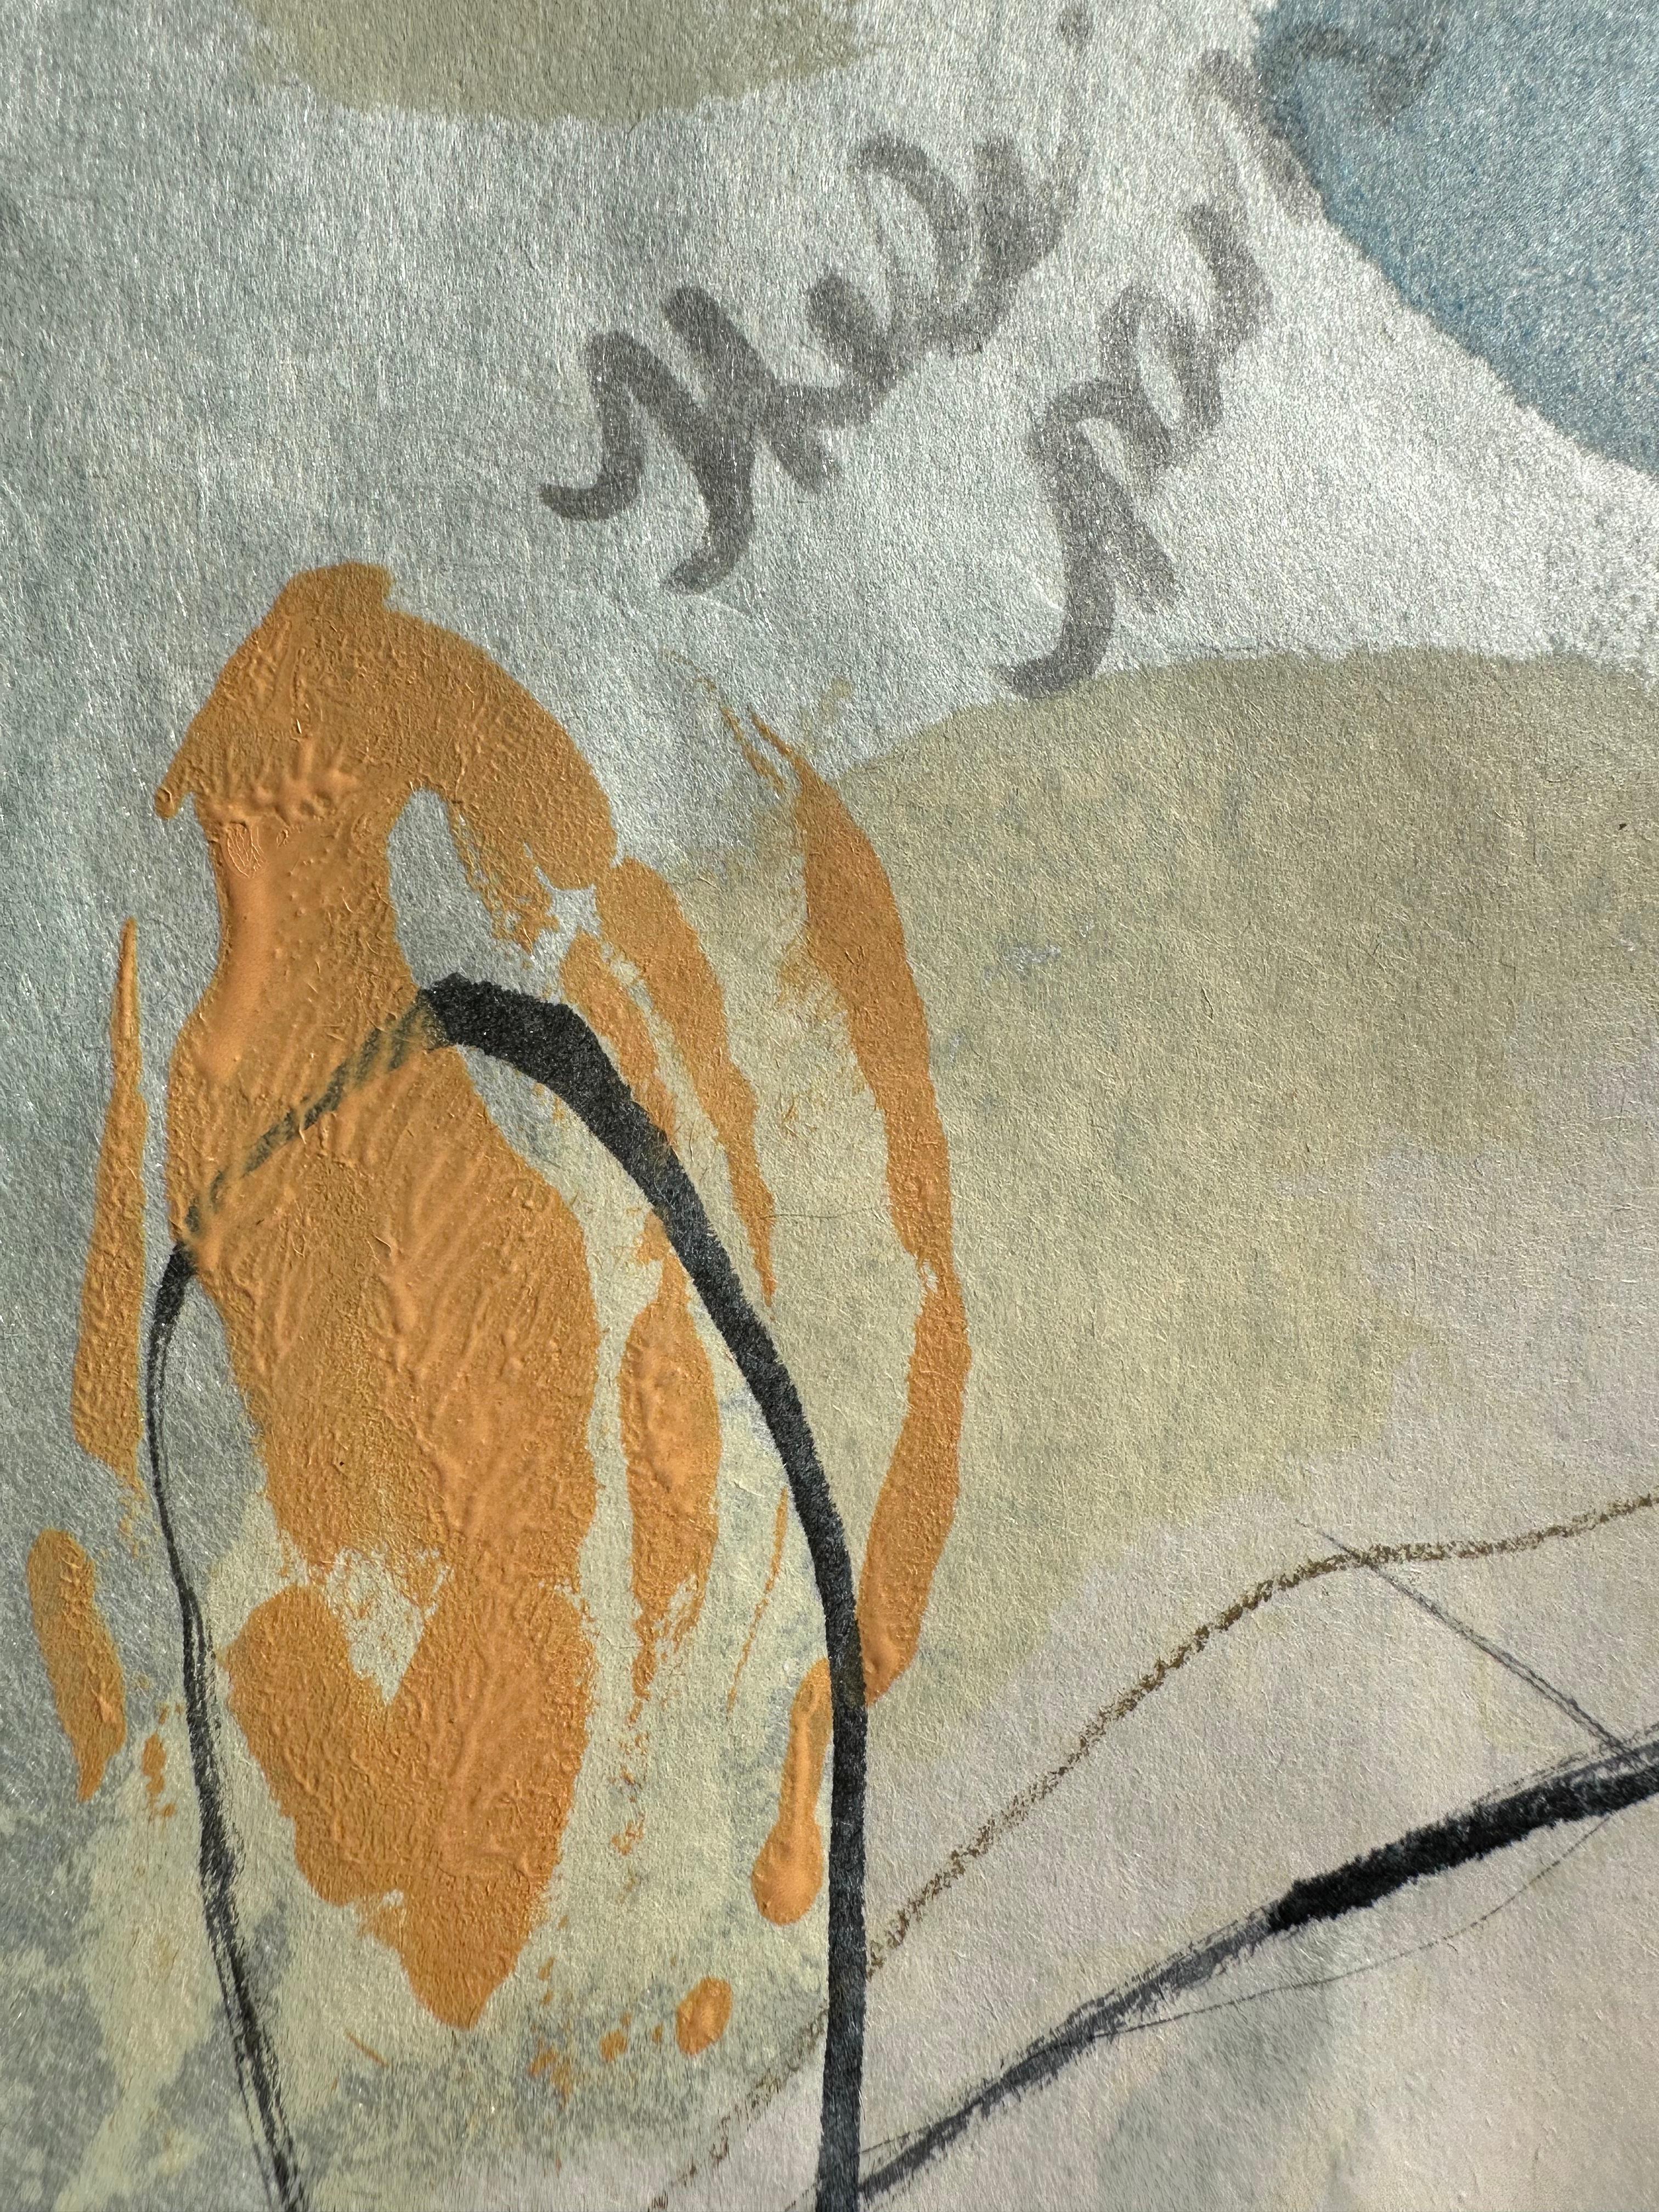 In These Paths So Dear To Me color, line, shape, and texture collide with handwritten romantic fragments of prose on Kozuke ivory paper. This one-of-a-kind, unmounted encaustic monotype illuminates a poetic interior landscape. The softness of the